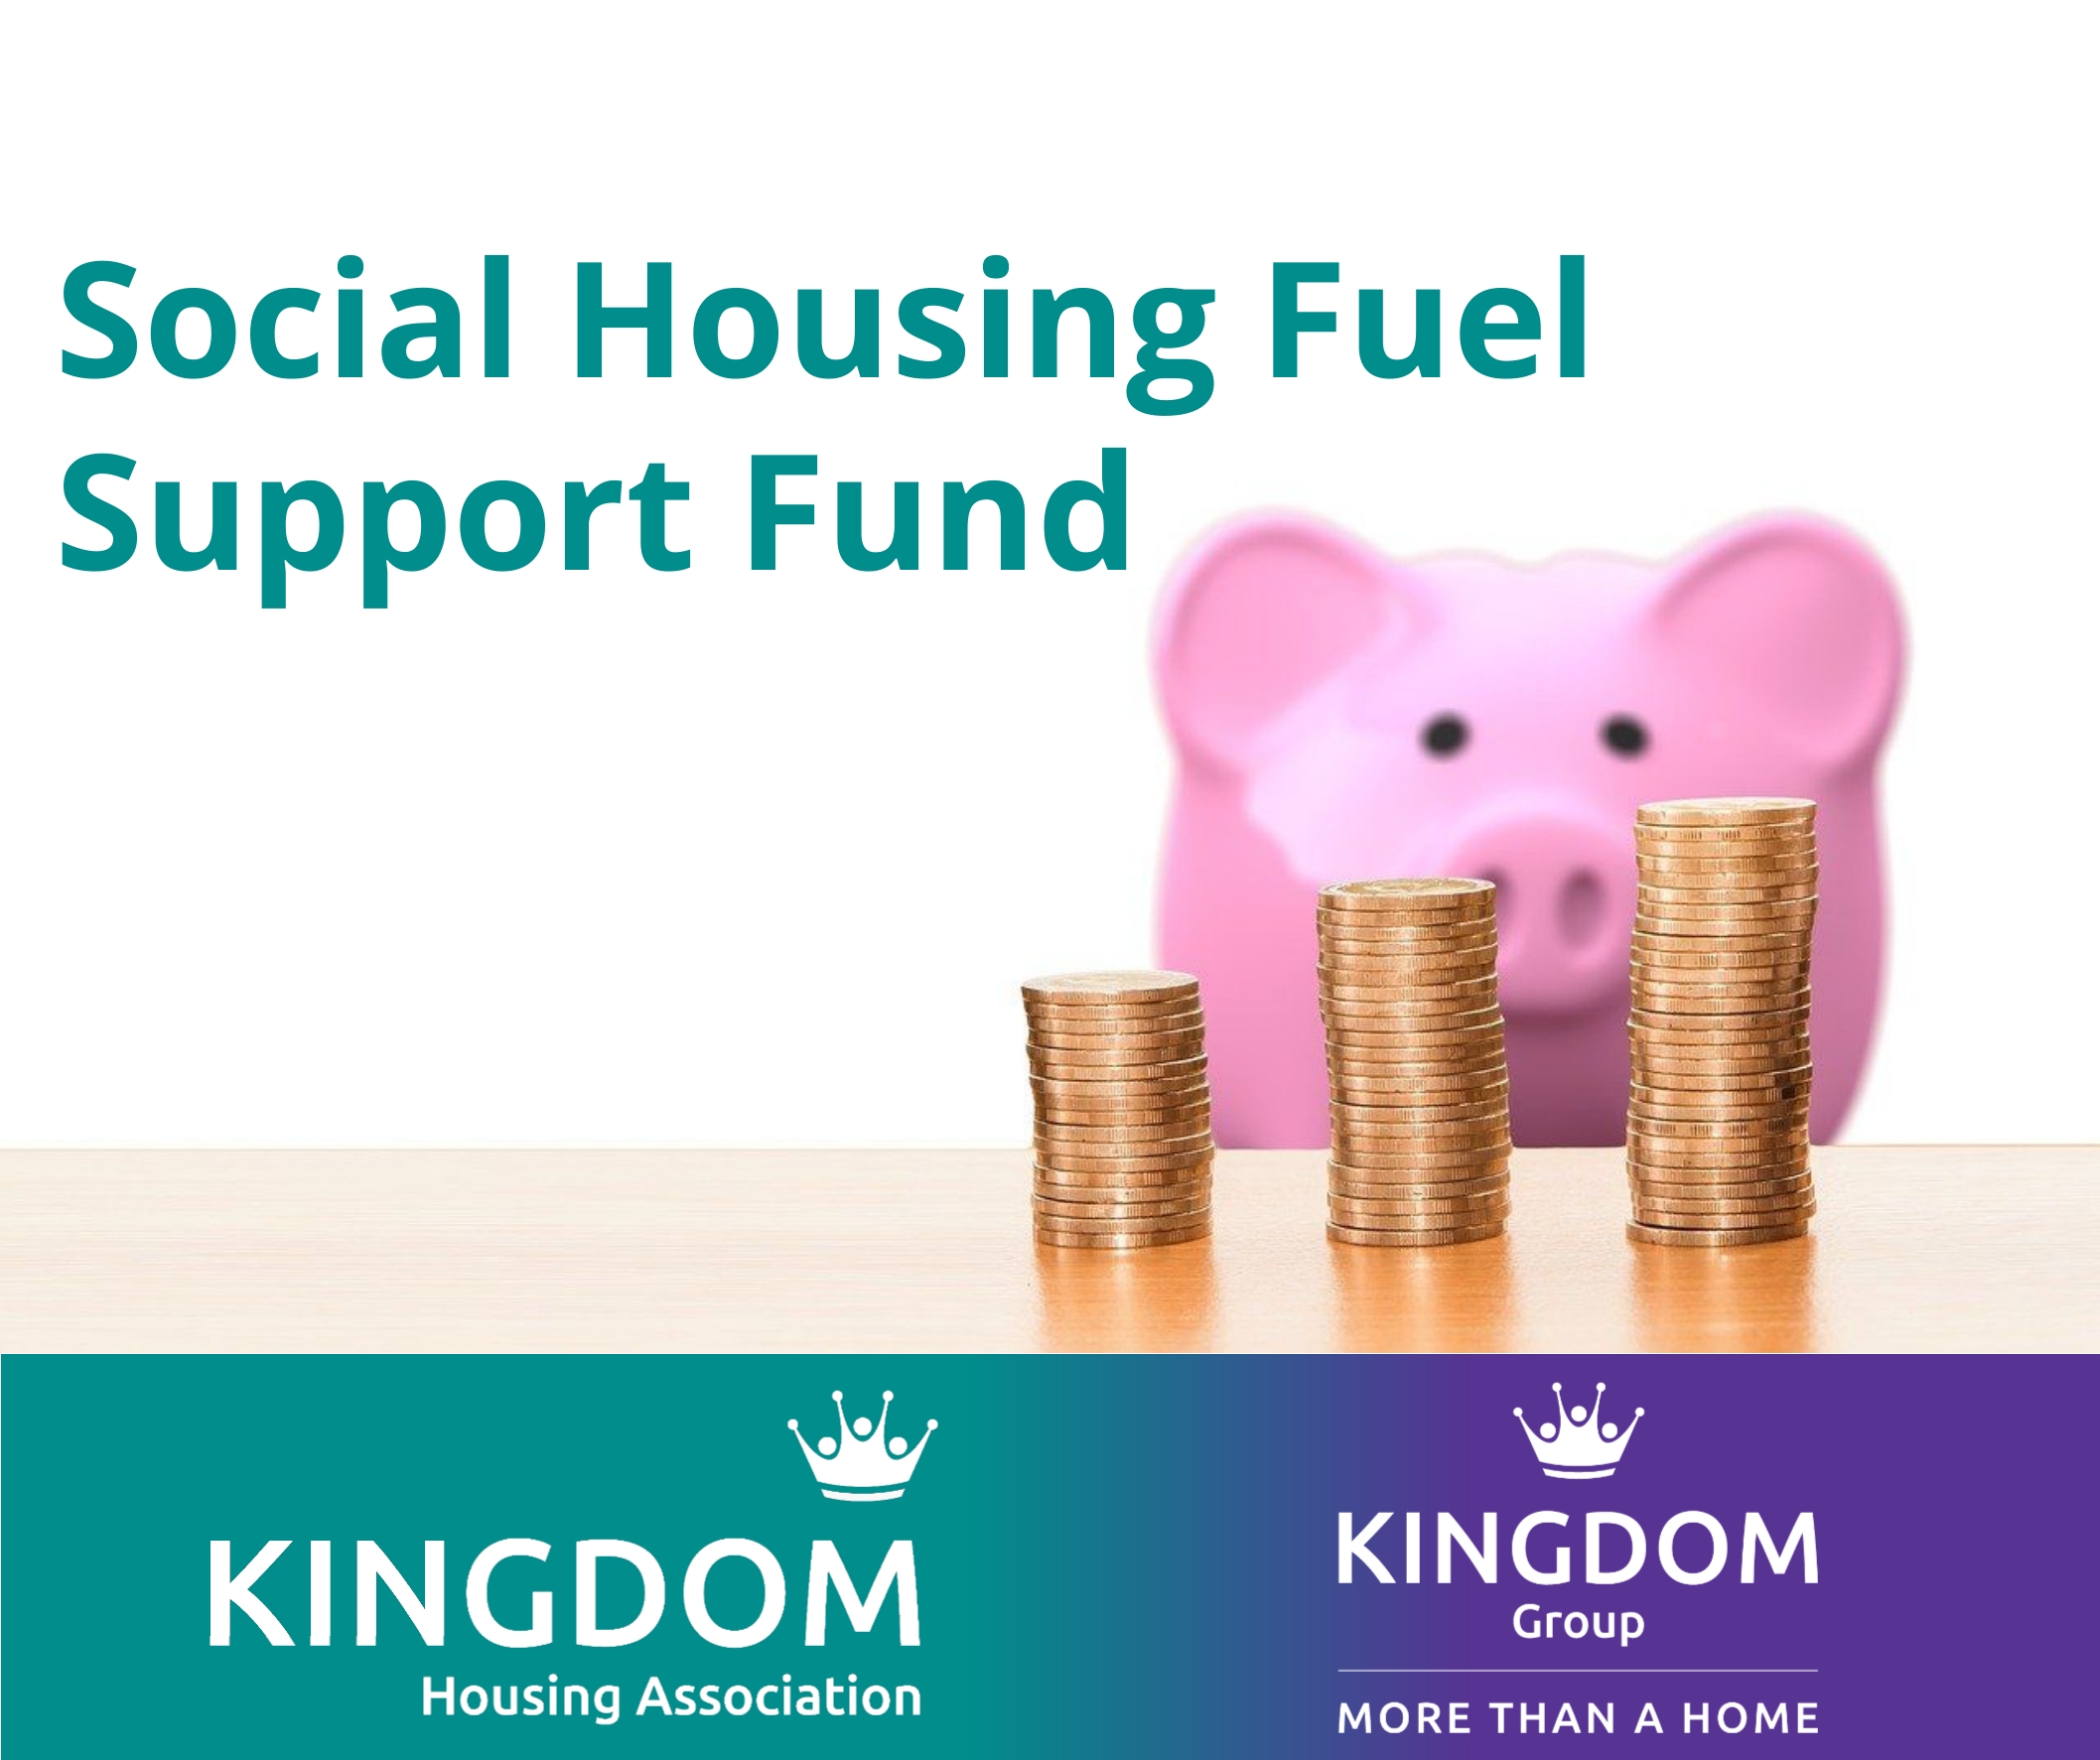 Kingdom provides £50,000 of help to fuel poor households